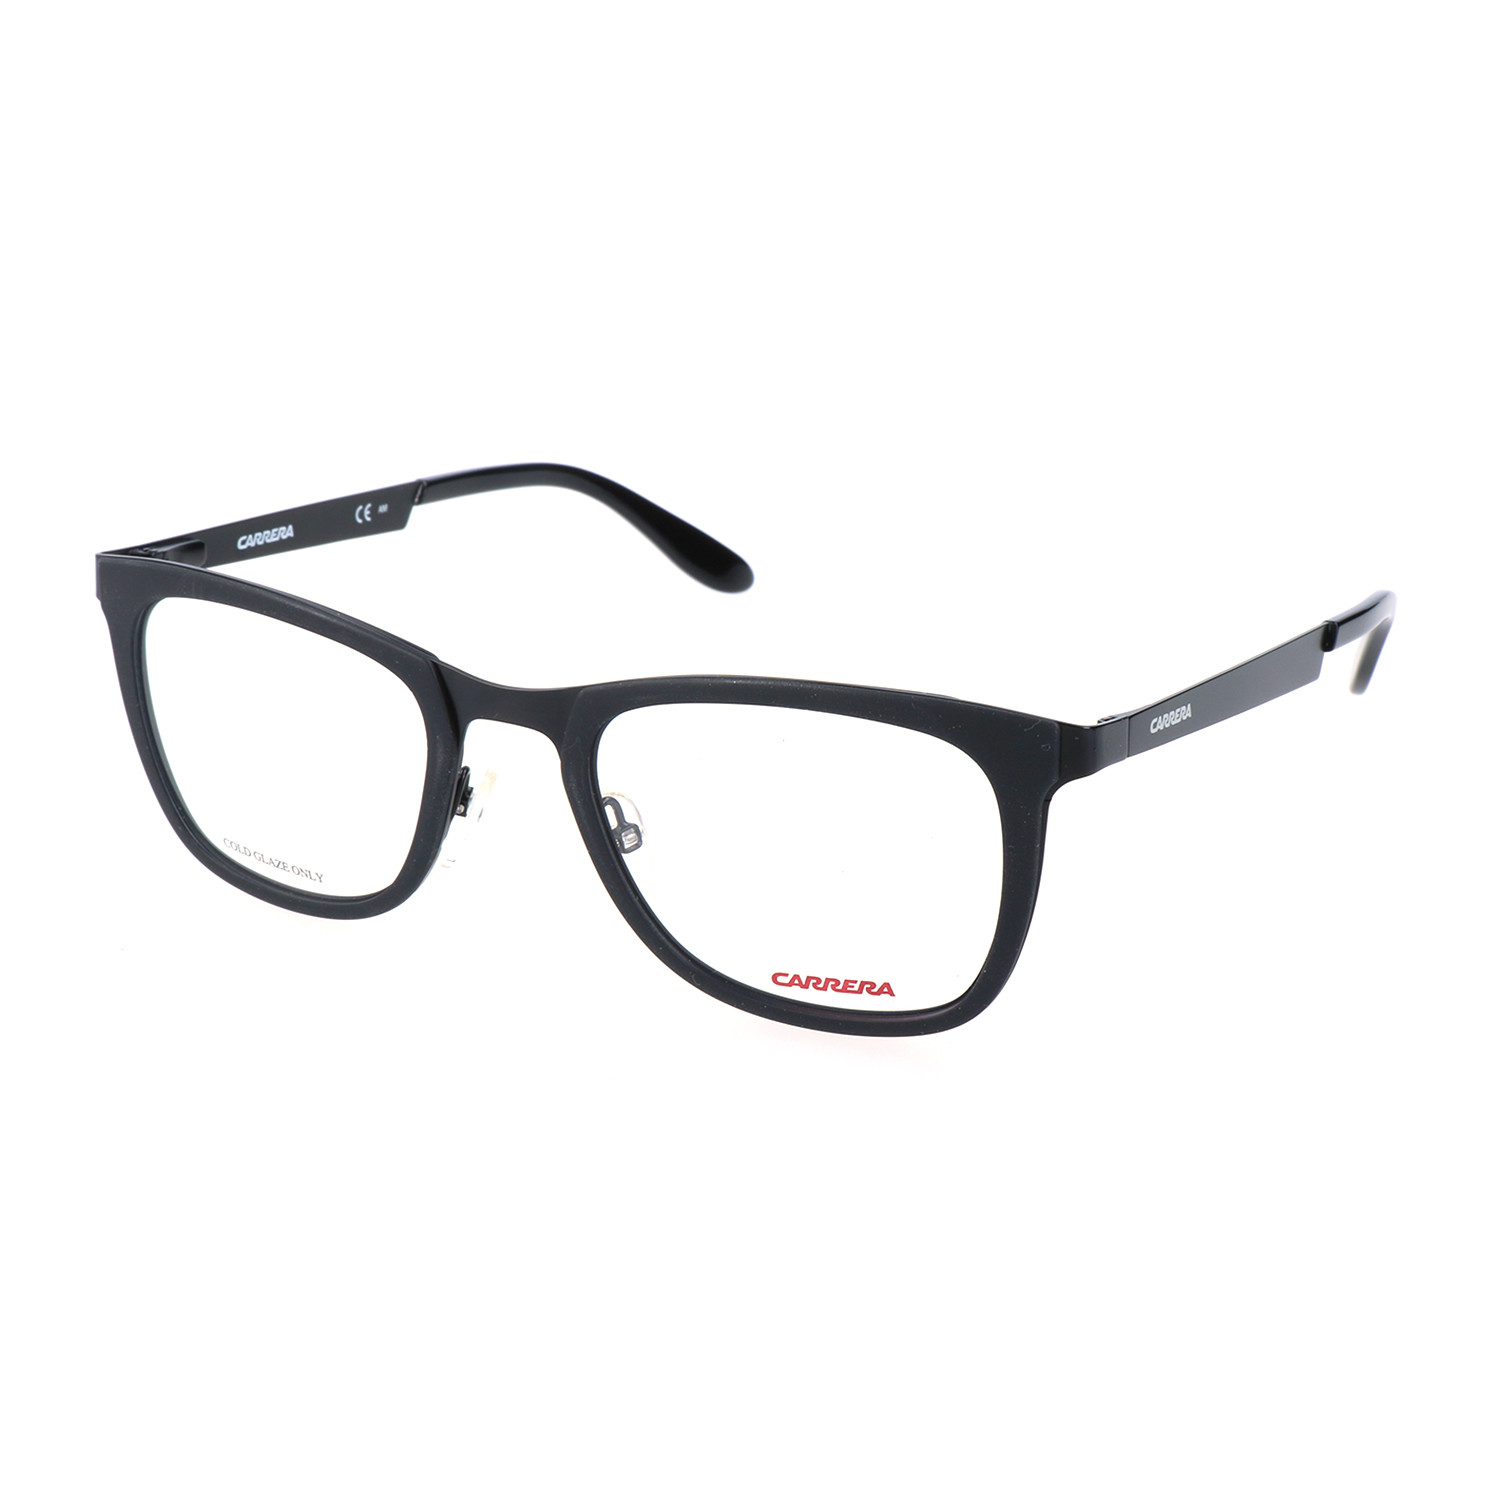 Neptune Frame // Matte Black - Clearance: Fashion Accessories - Touch ...